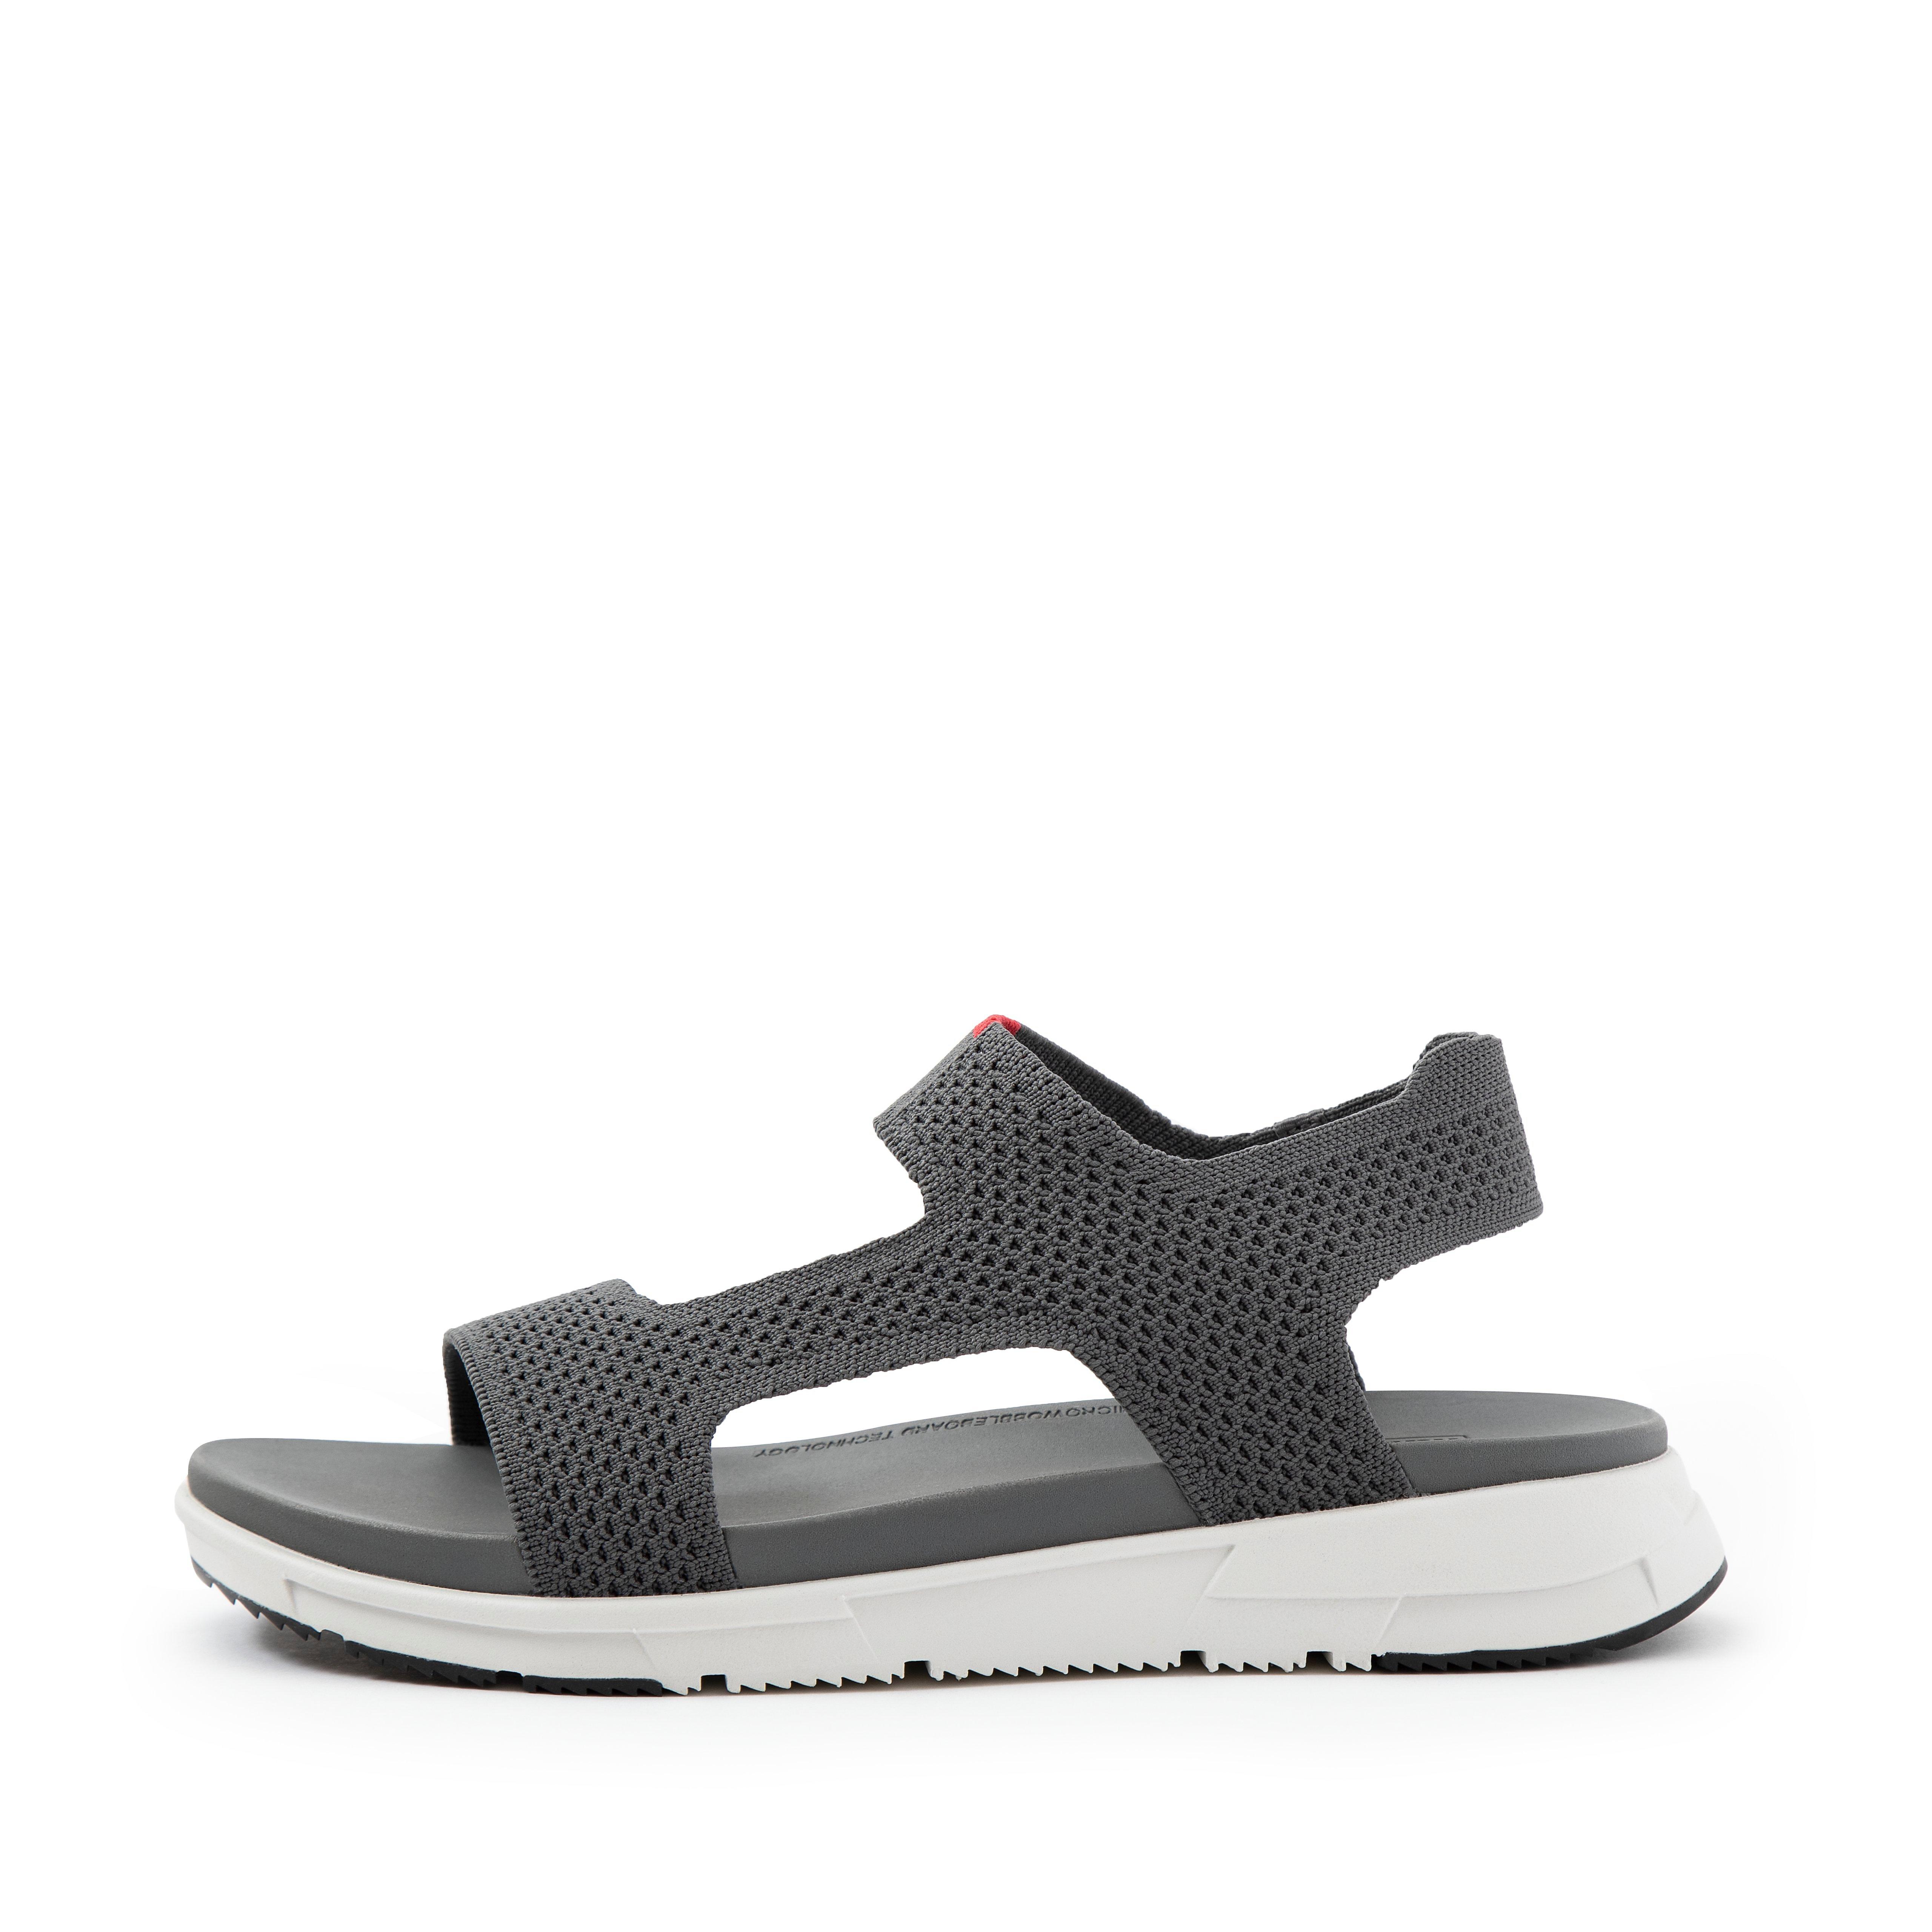 fitflop slippers mens